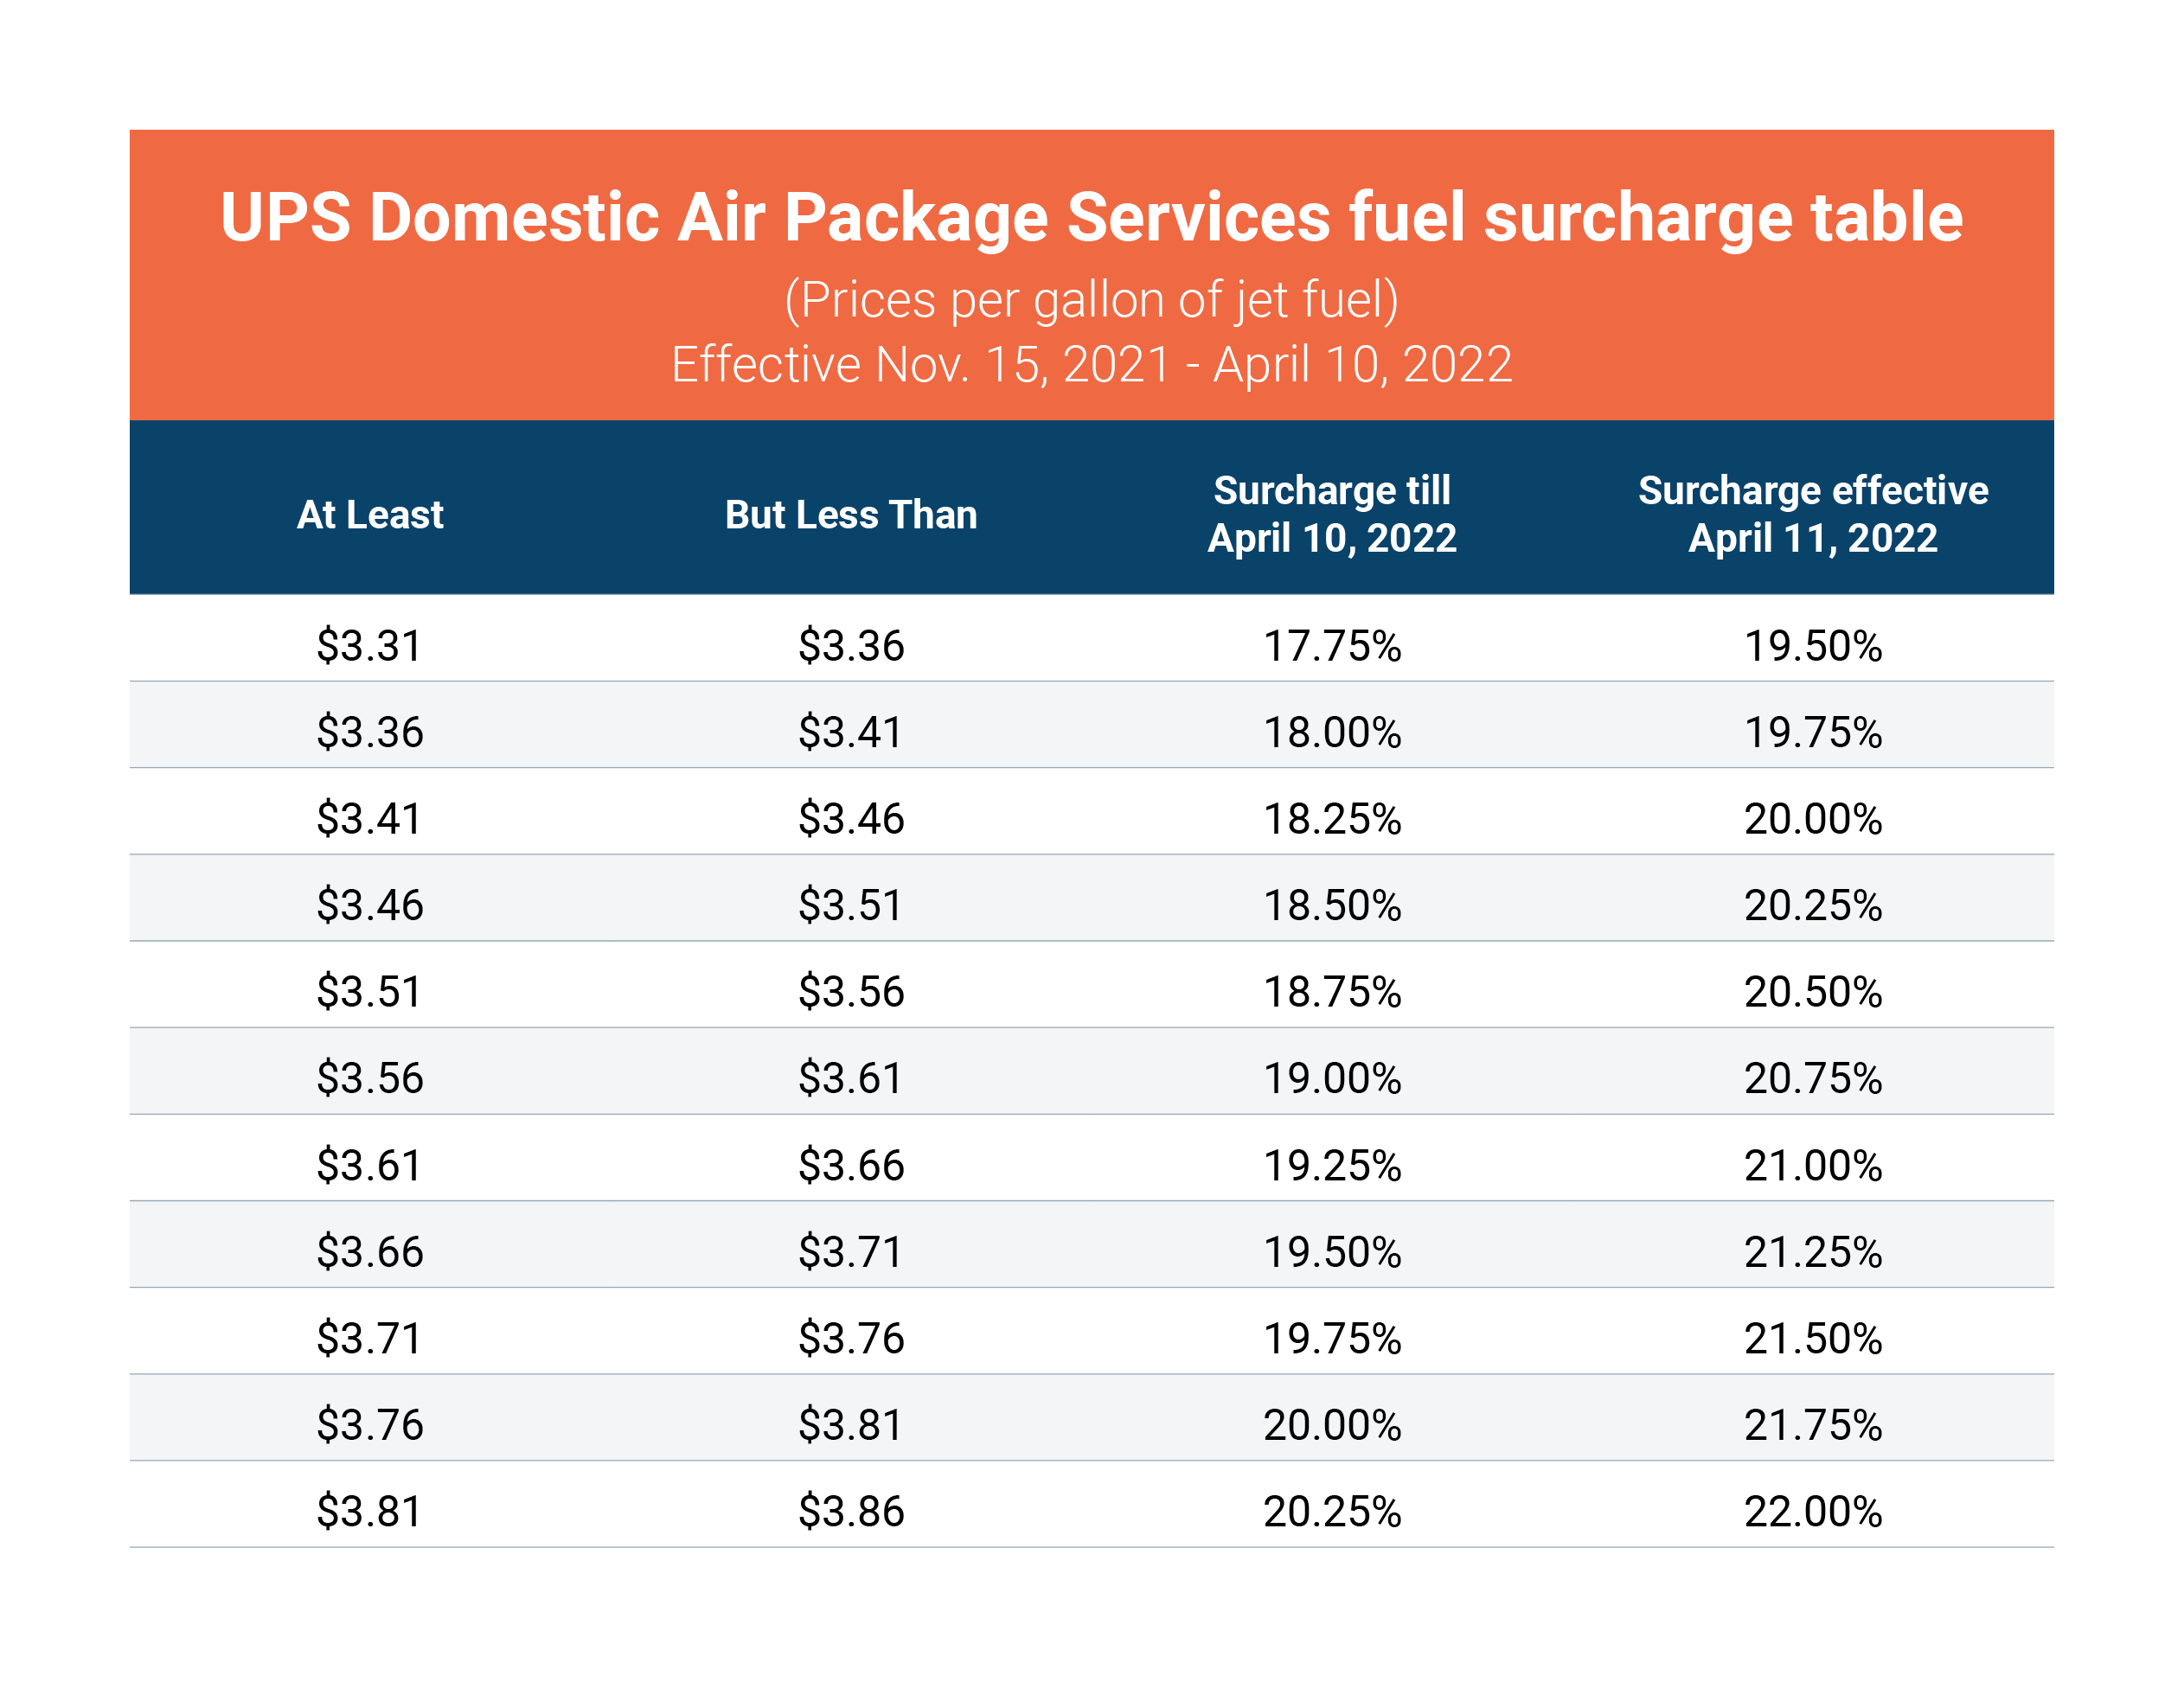 Snapshot of 2022 UPS Domestic Air fuel surcharges